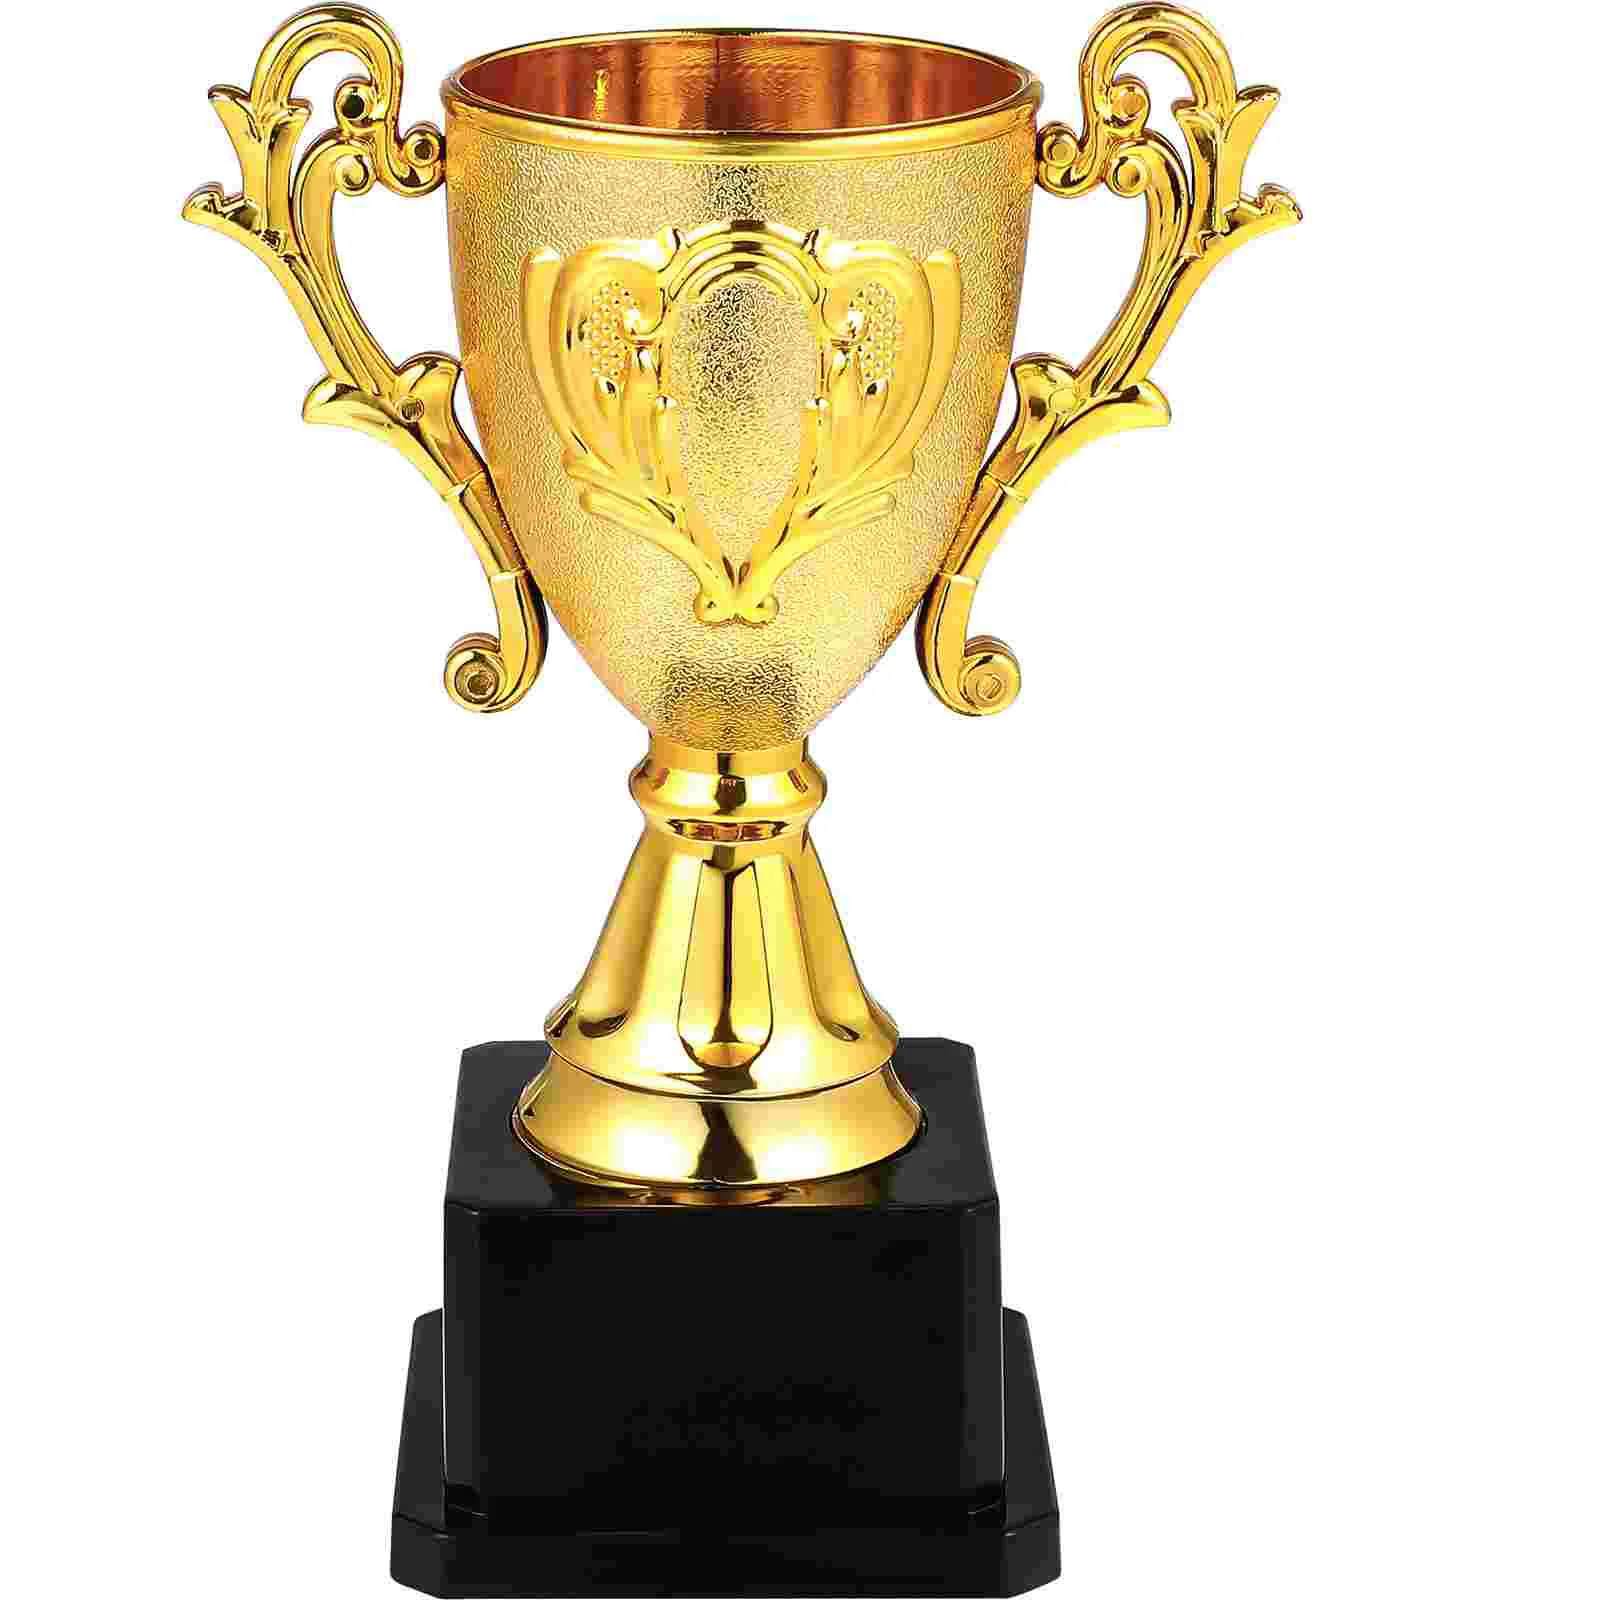 

Winner Trophy Gift Personal Competition Toy Tournaments Party Favors Kids Award Trophies Games Plastic